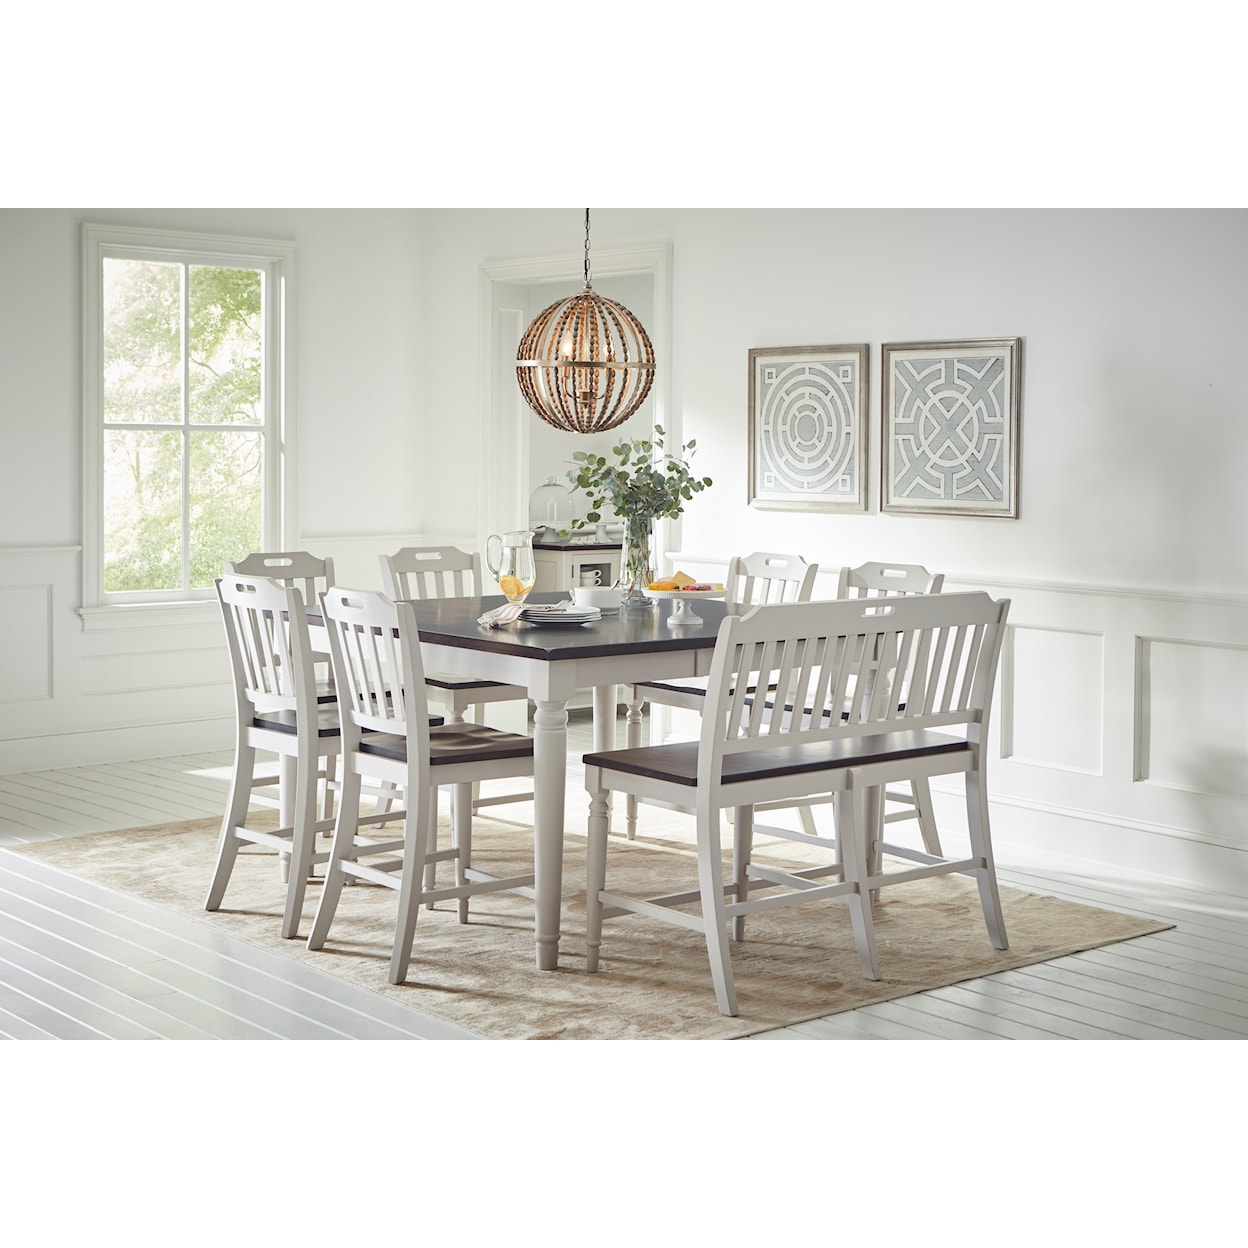 VFM Signature Orchard Park Counter Height Table w/ 6 Chairs & Bench